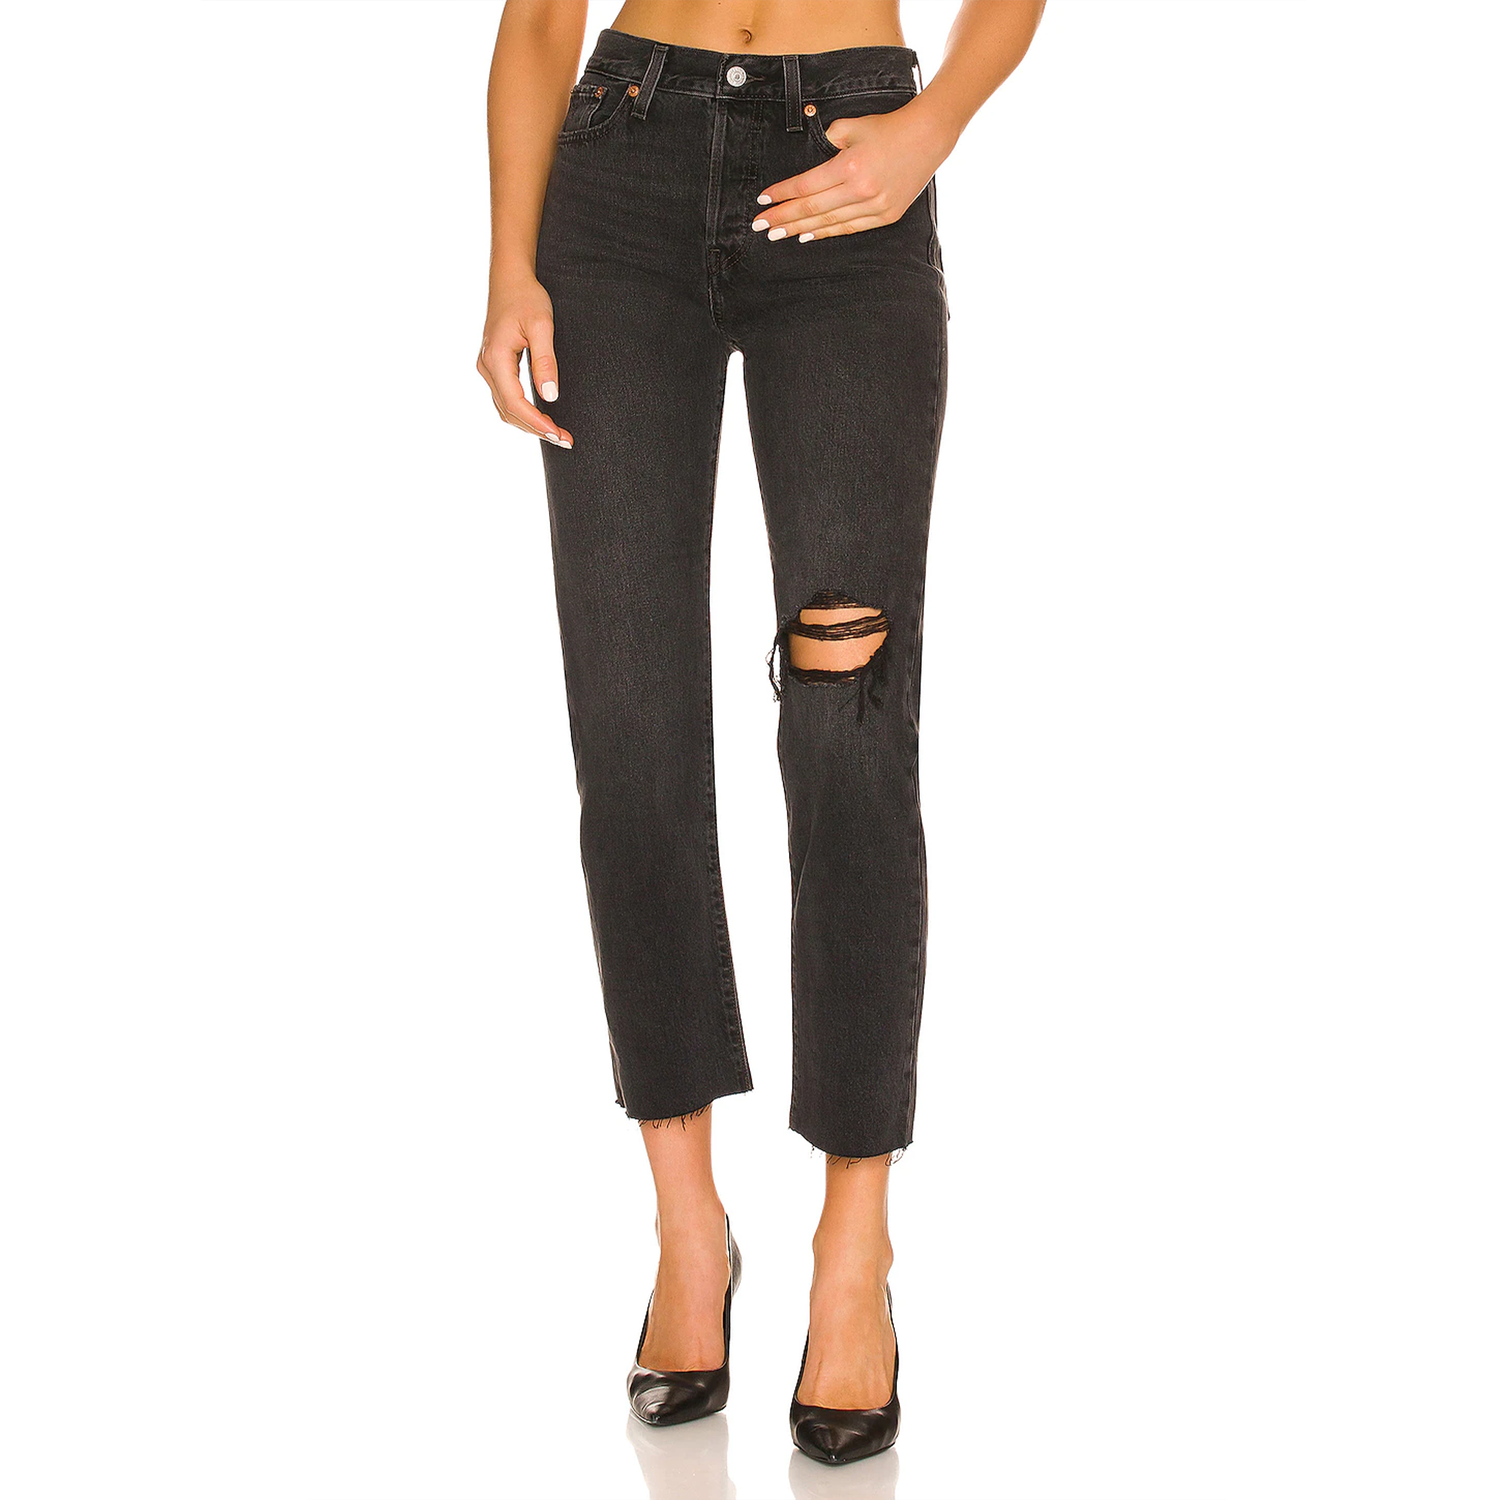 Levi's Wedgie Straight Long Bottom Jean. The After Sunset Levi's Wedgie Straight Jeans complete any outfit! These essential black denim pants are complete with a high waisted fit, a relaxed straight leg, raw hem, distressed detailing, and the iconic brown leather Levi's patch at the back